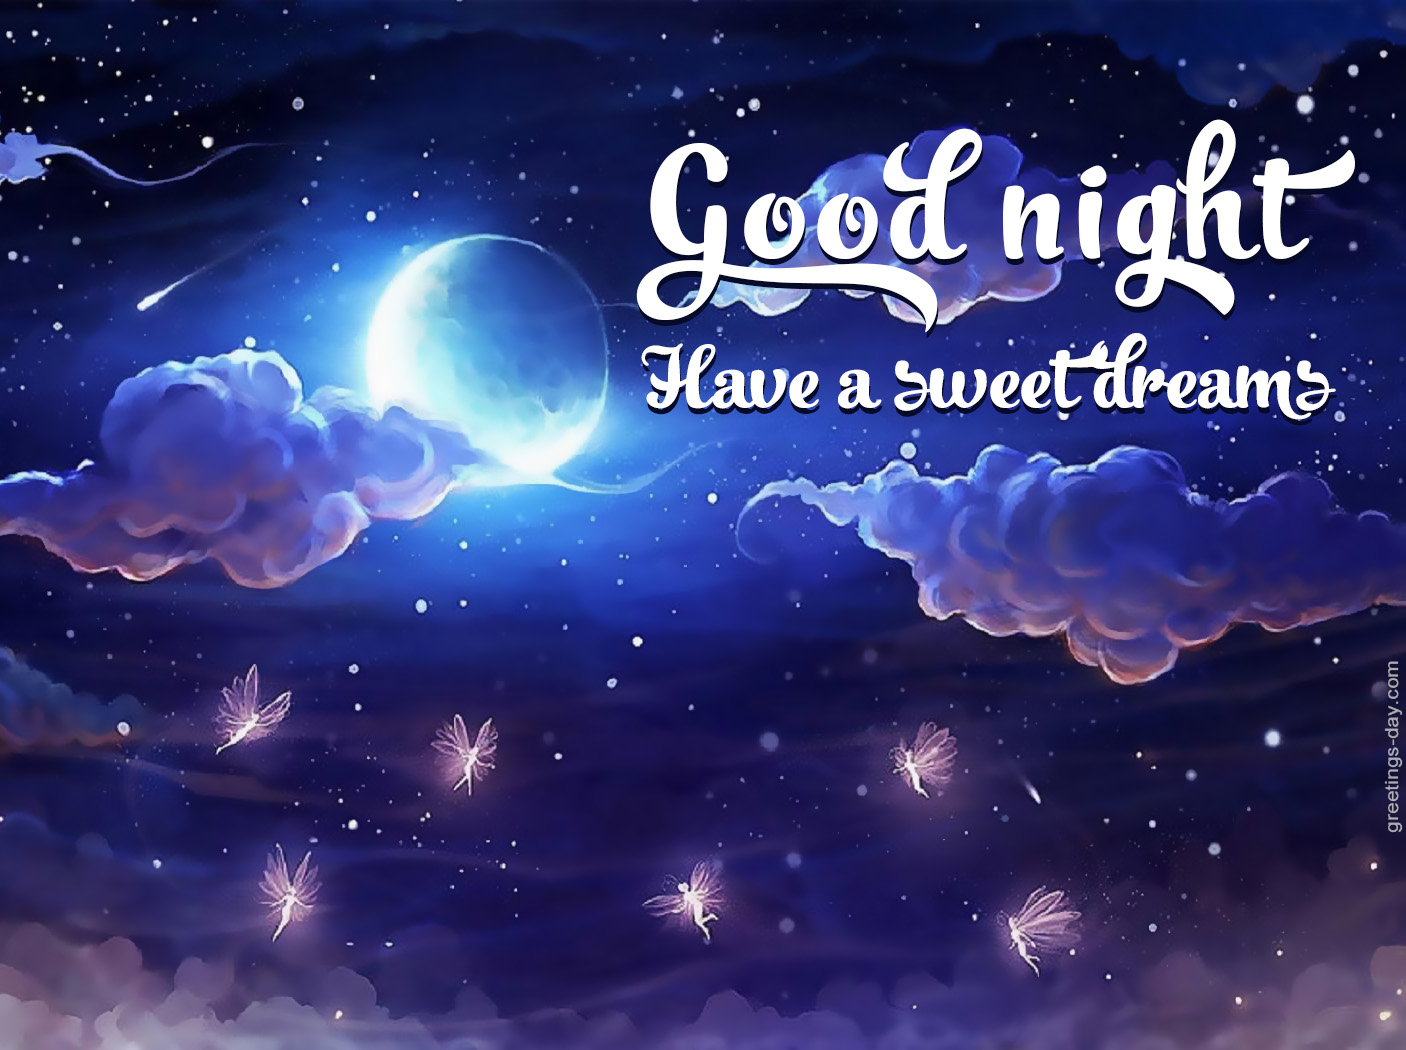 Good Night Images Hd Download - Good Night Have A Sweet Dreams - HD Wallpaper 